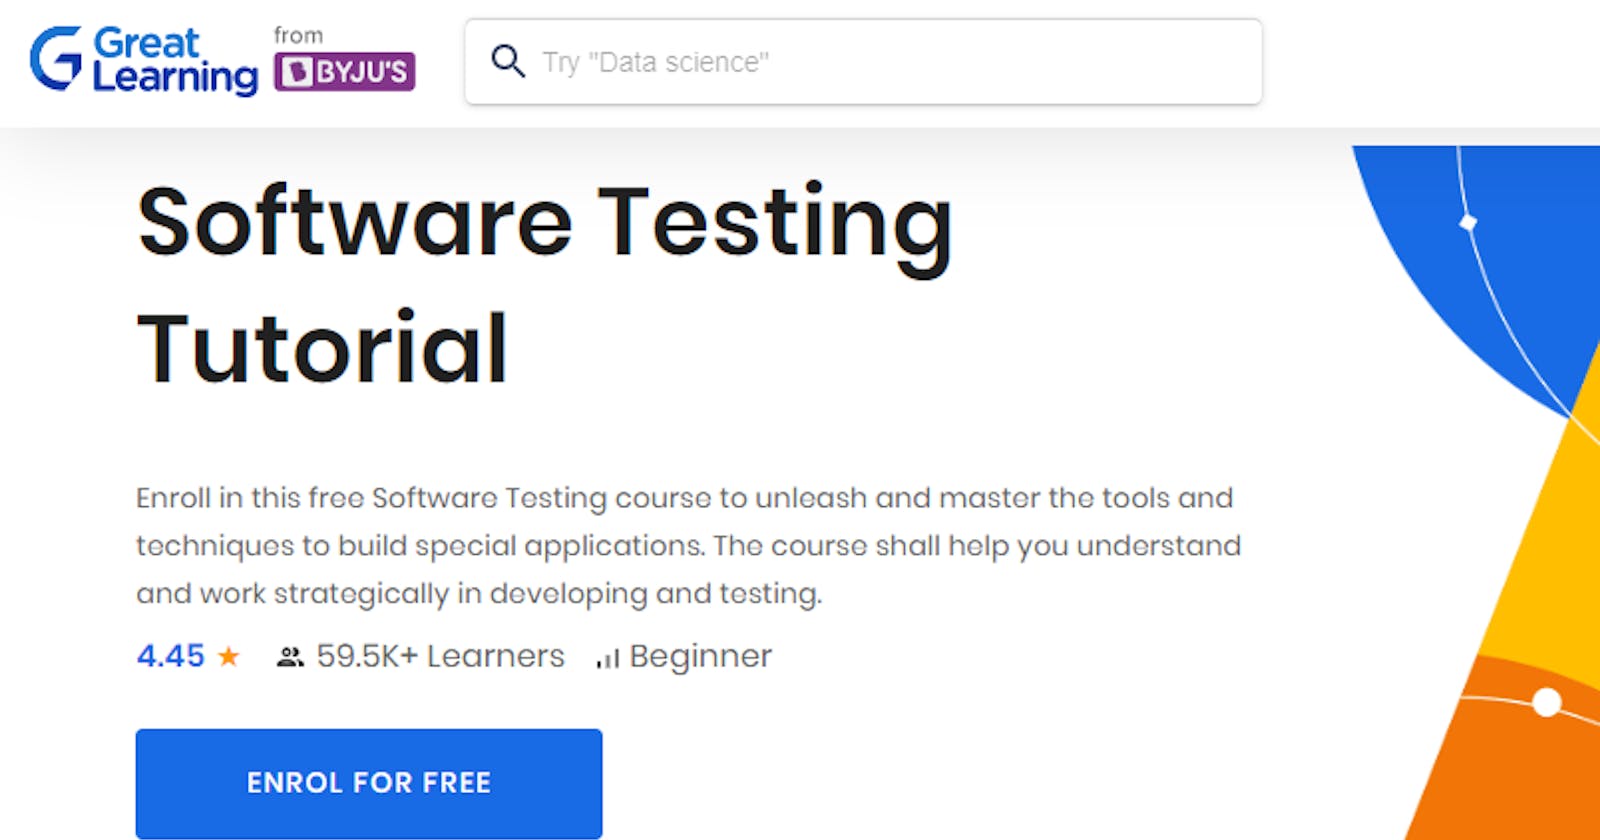 [Great Learning] Software Testing Tutorial